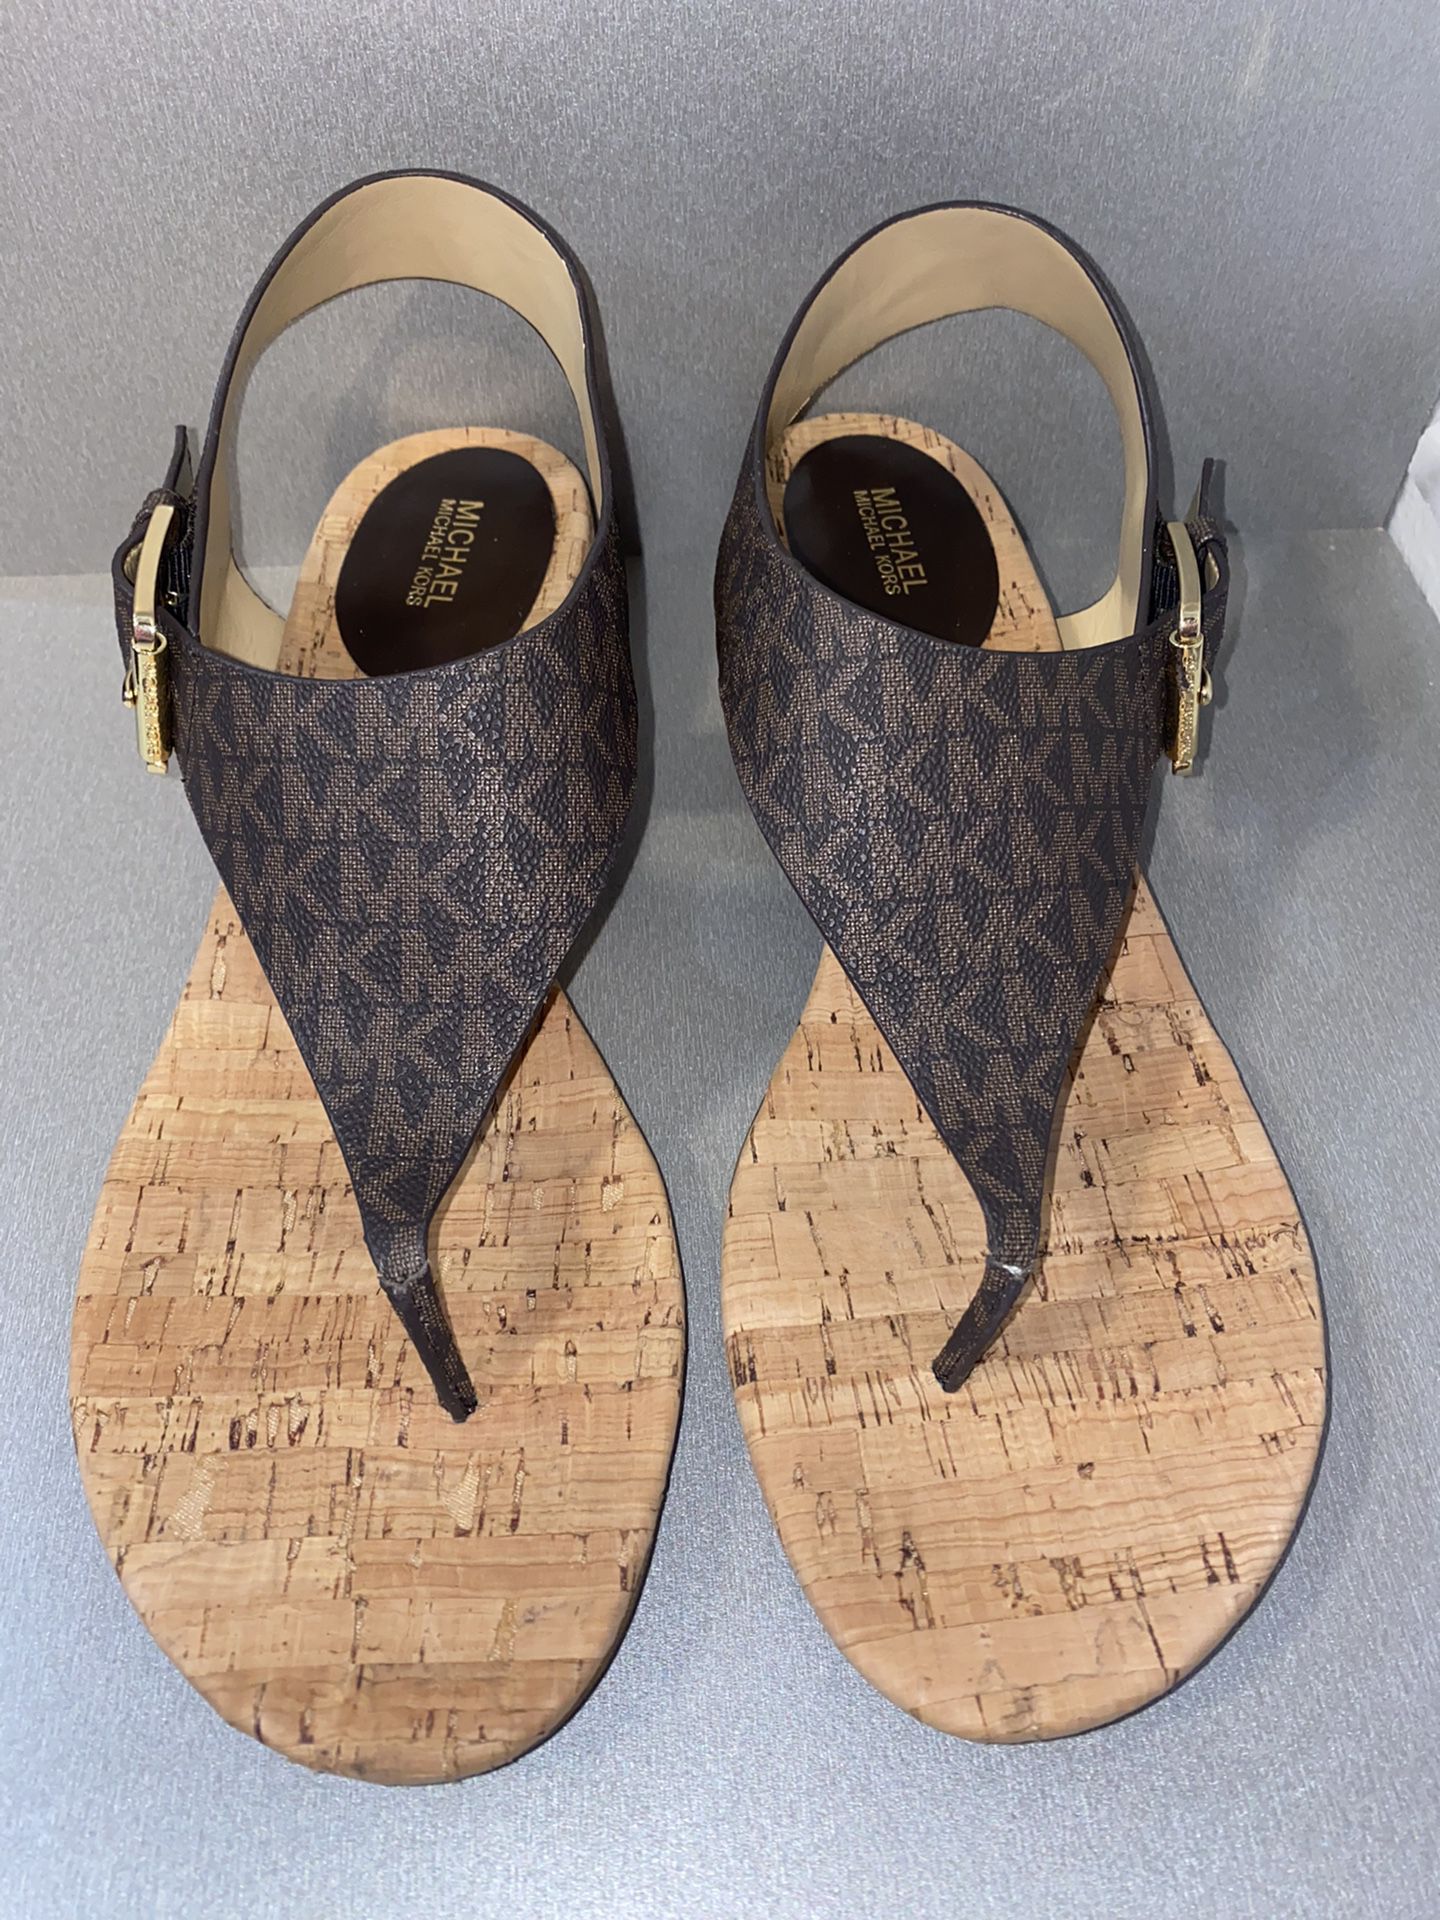 Women's Size 11 Michael Kors Shoes for Sale in Lake Worth, - OfferUp